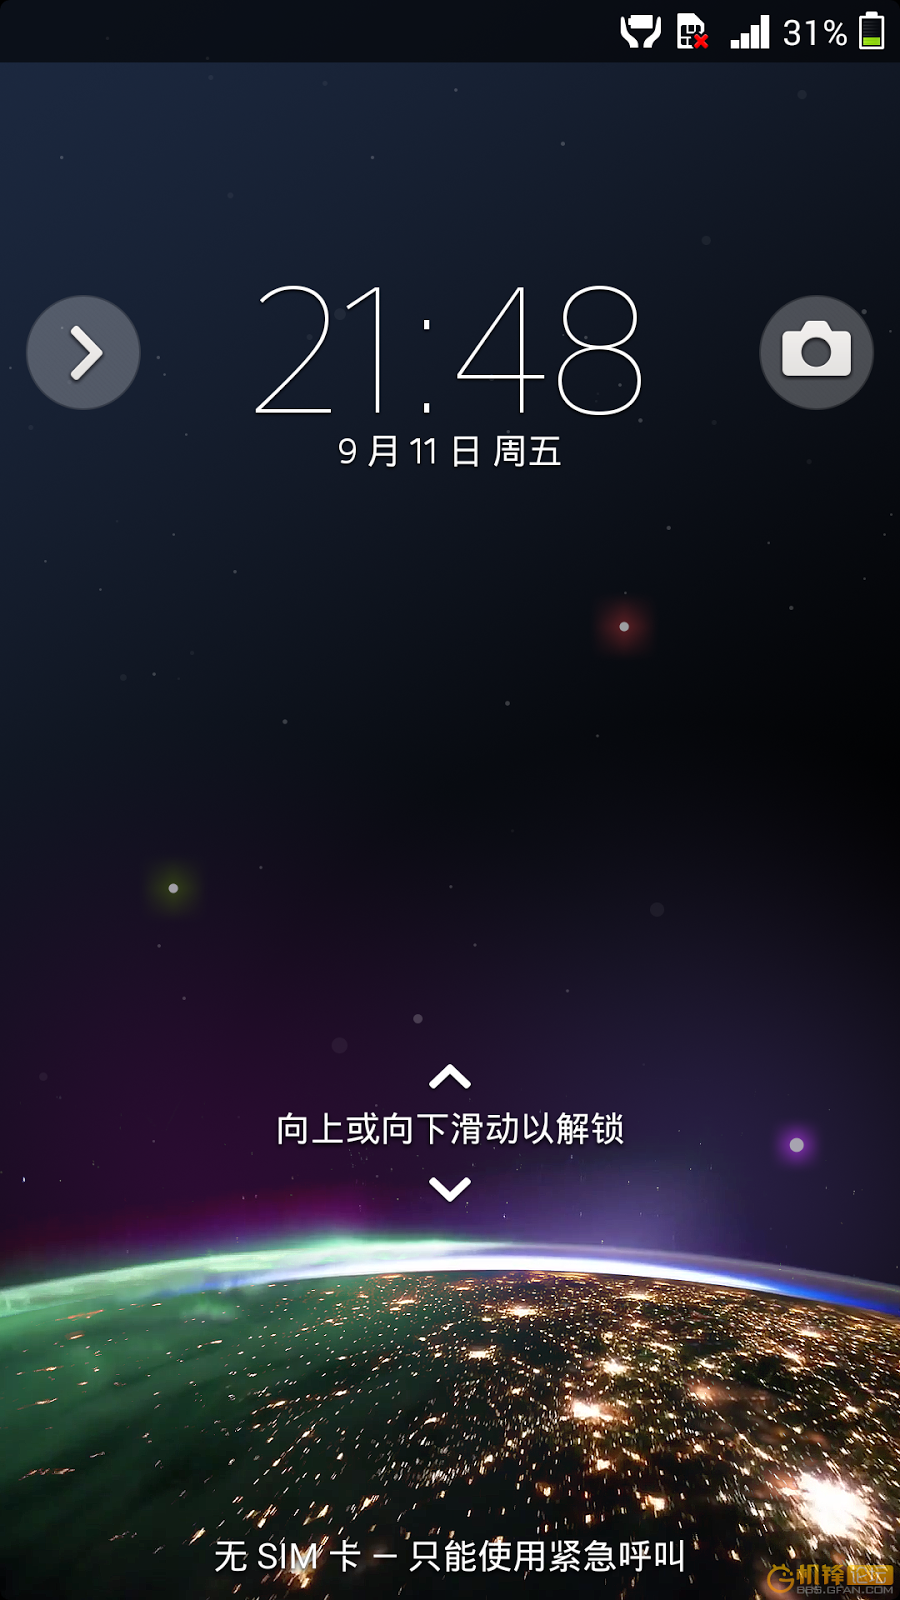 Sony Xperia M Android 4.3 Jelly Bean